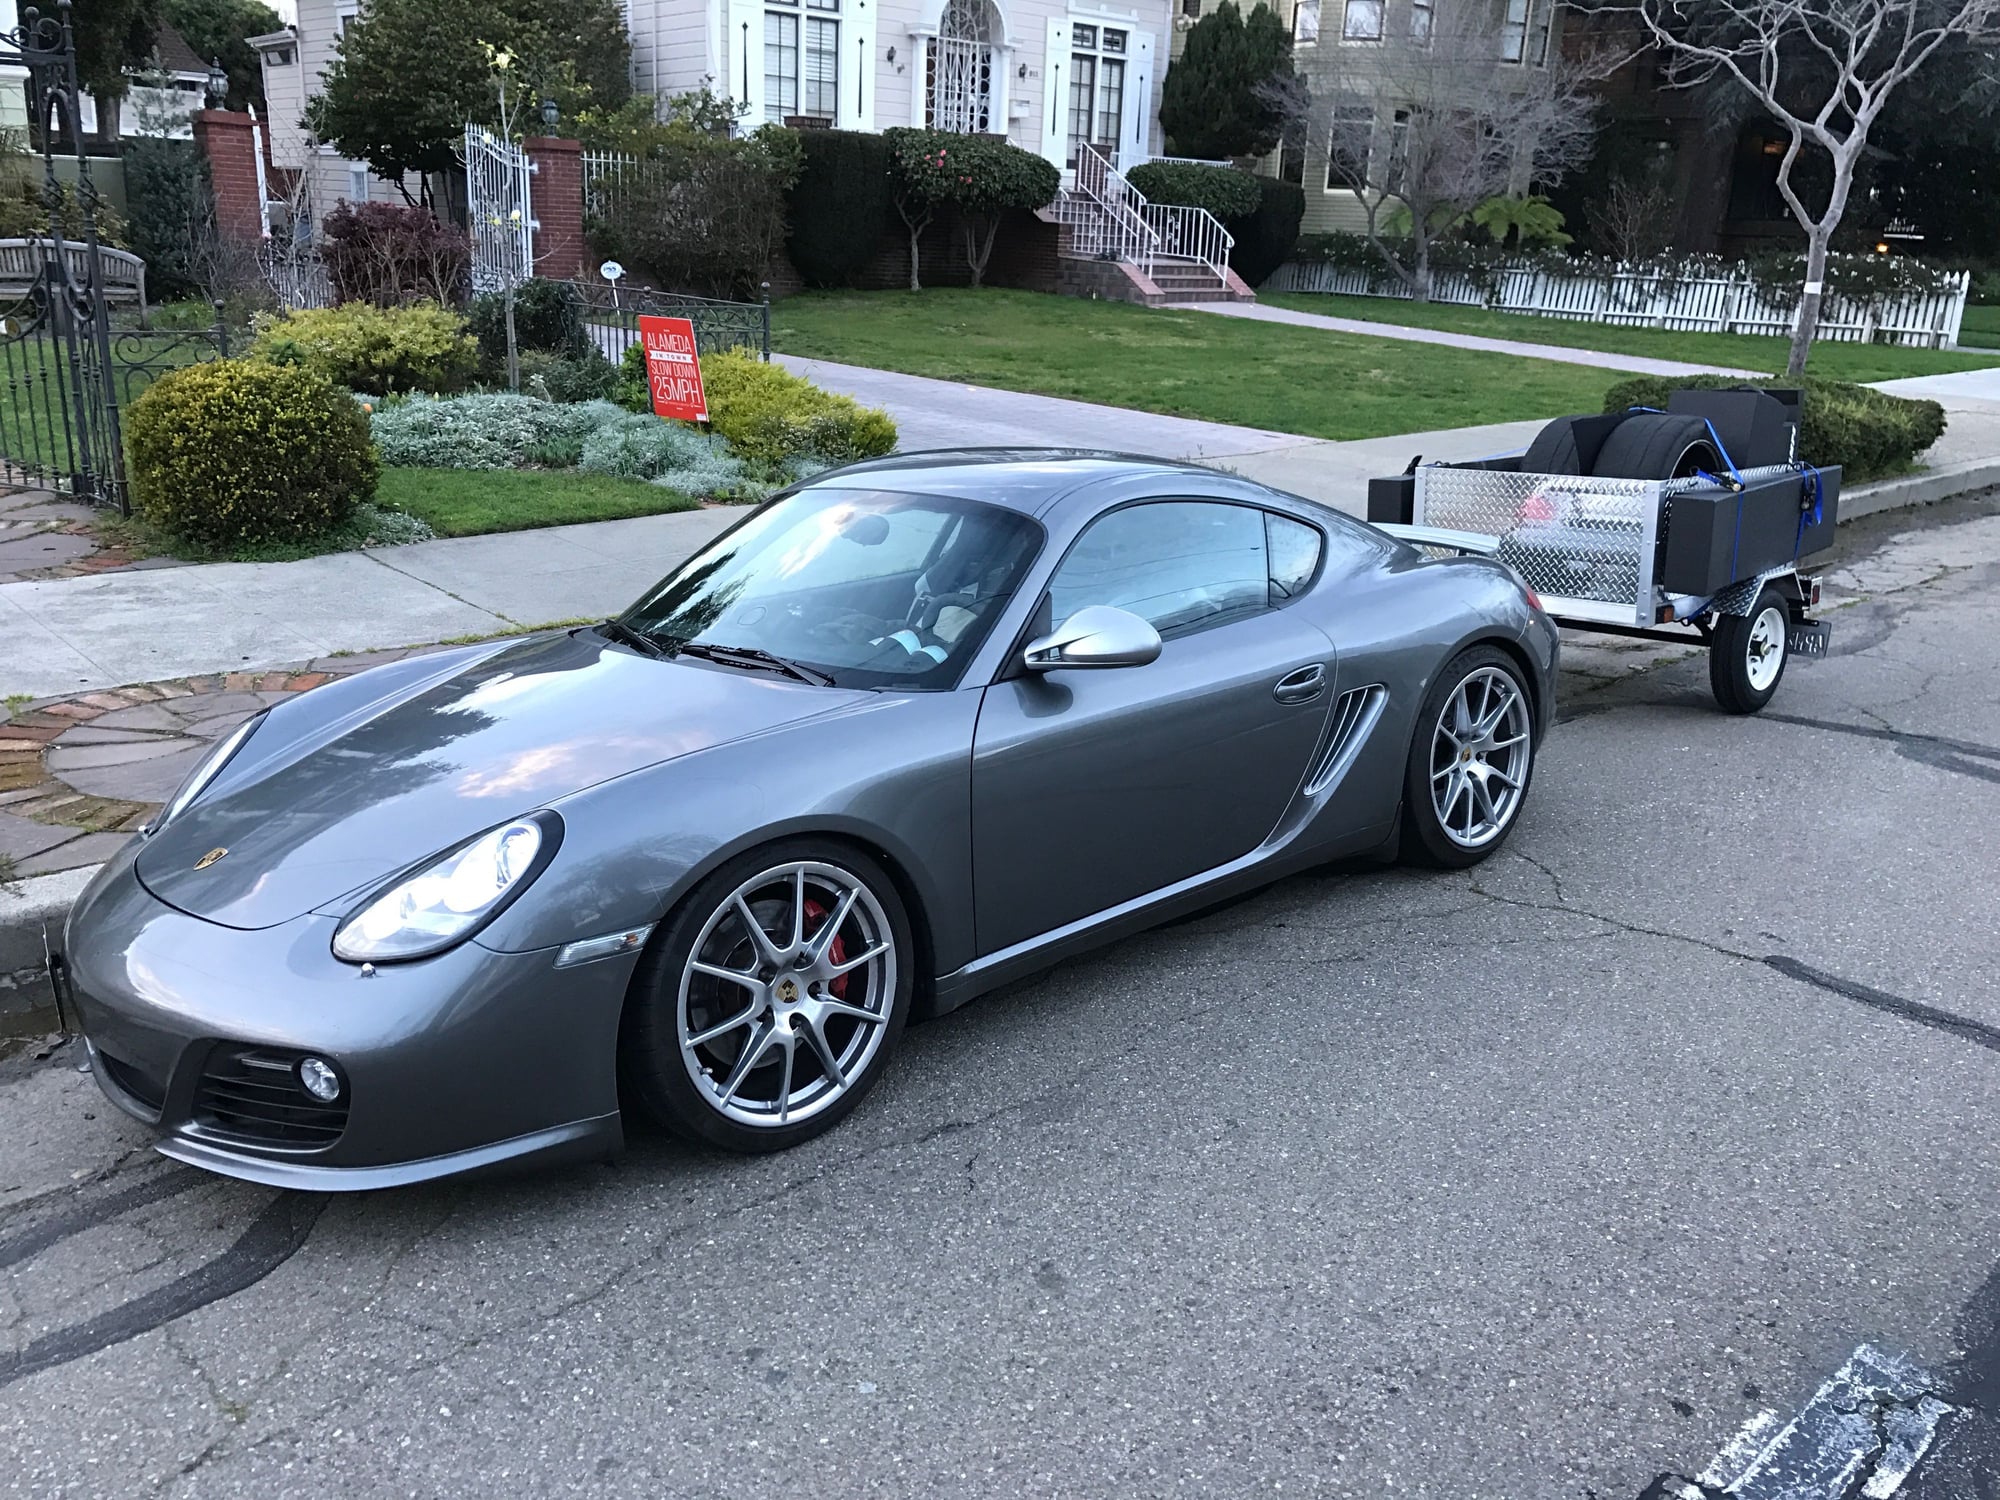 2012 Porsche Cayman - 2012 Cayman R + trailer, Forgeline Wheels, & every Reasonable Performance upgrade - Used - VIN WP0AB2A84CS793309 - 34,000 Miles - 6 cyl - 2WD - Manual - Coupe - Gray - Alameda, CA 94501, United States